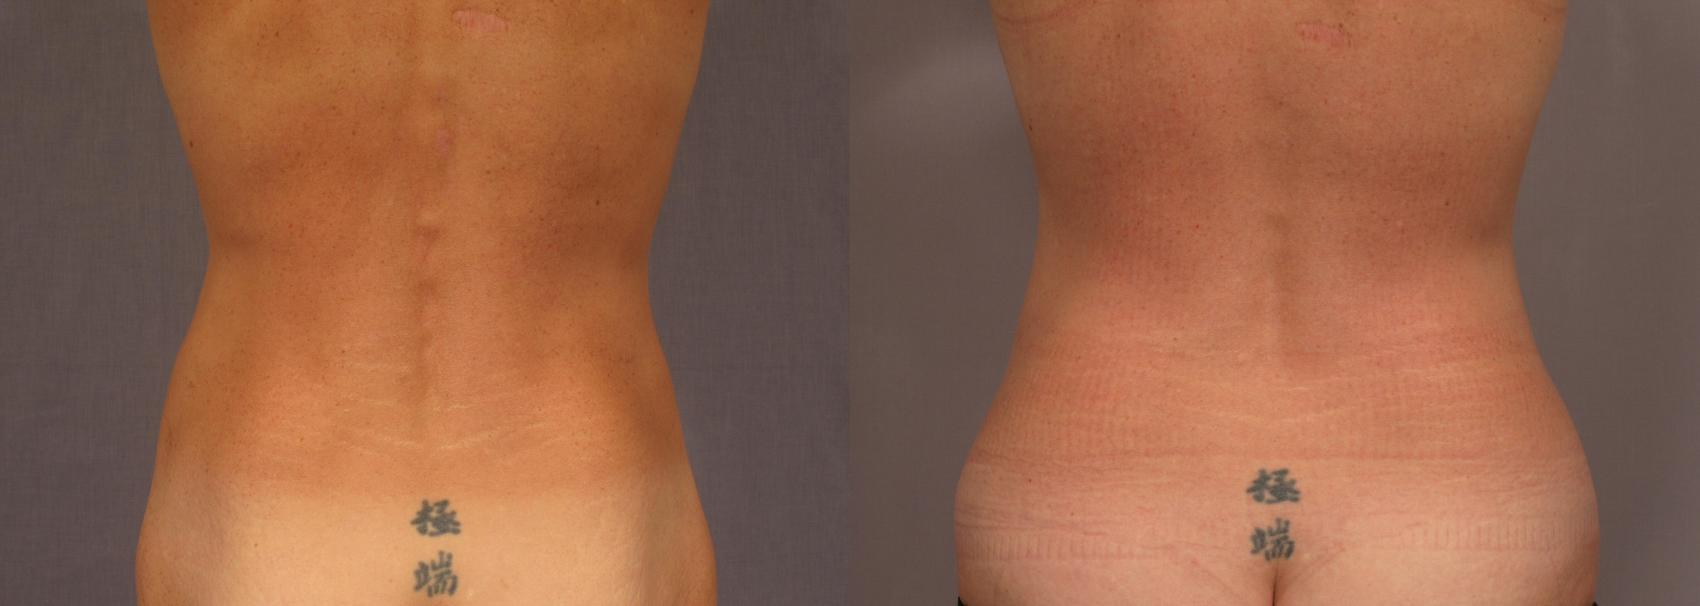 Tummy Tuck Before and After Pictures Case 326 | Naples and Ft. Myers, FL |  Kent V. Hasen, MD: Aesthetic Plastic Surgery & Med Spa of Naples